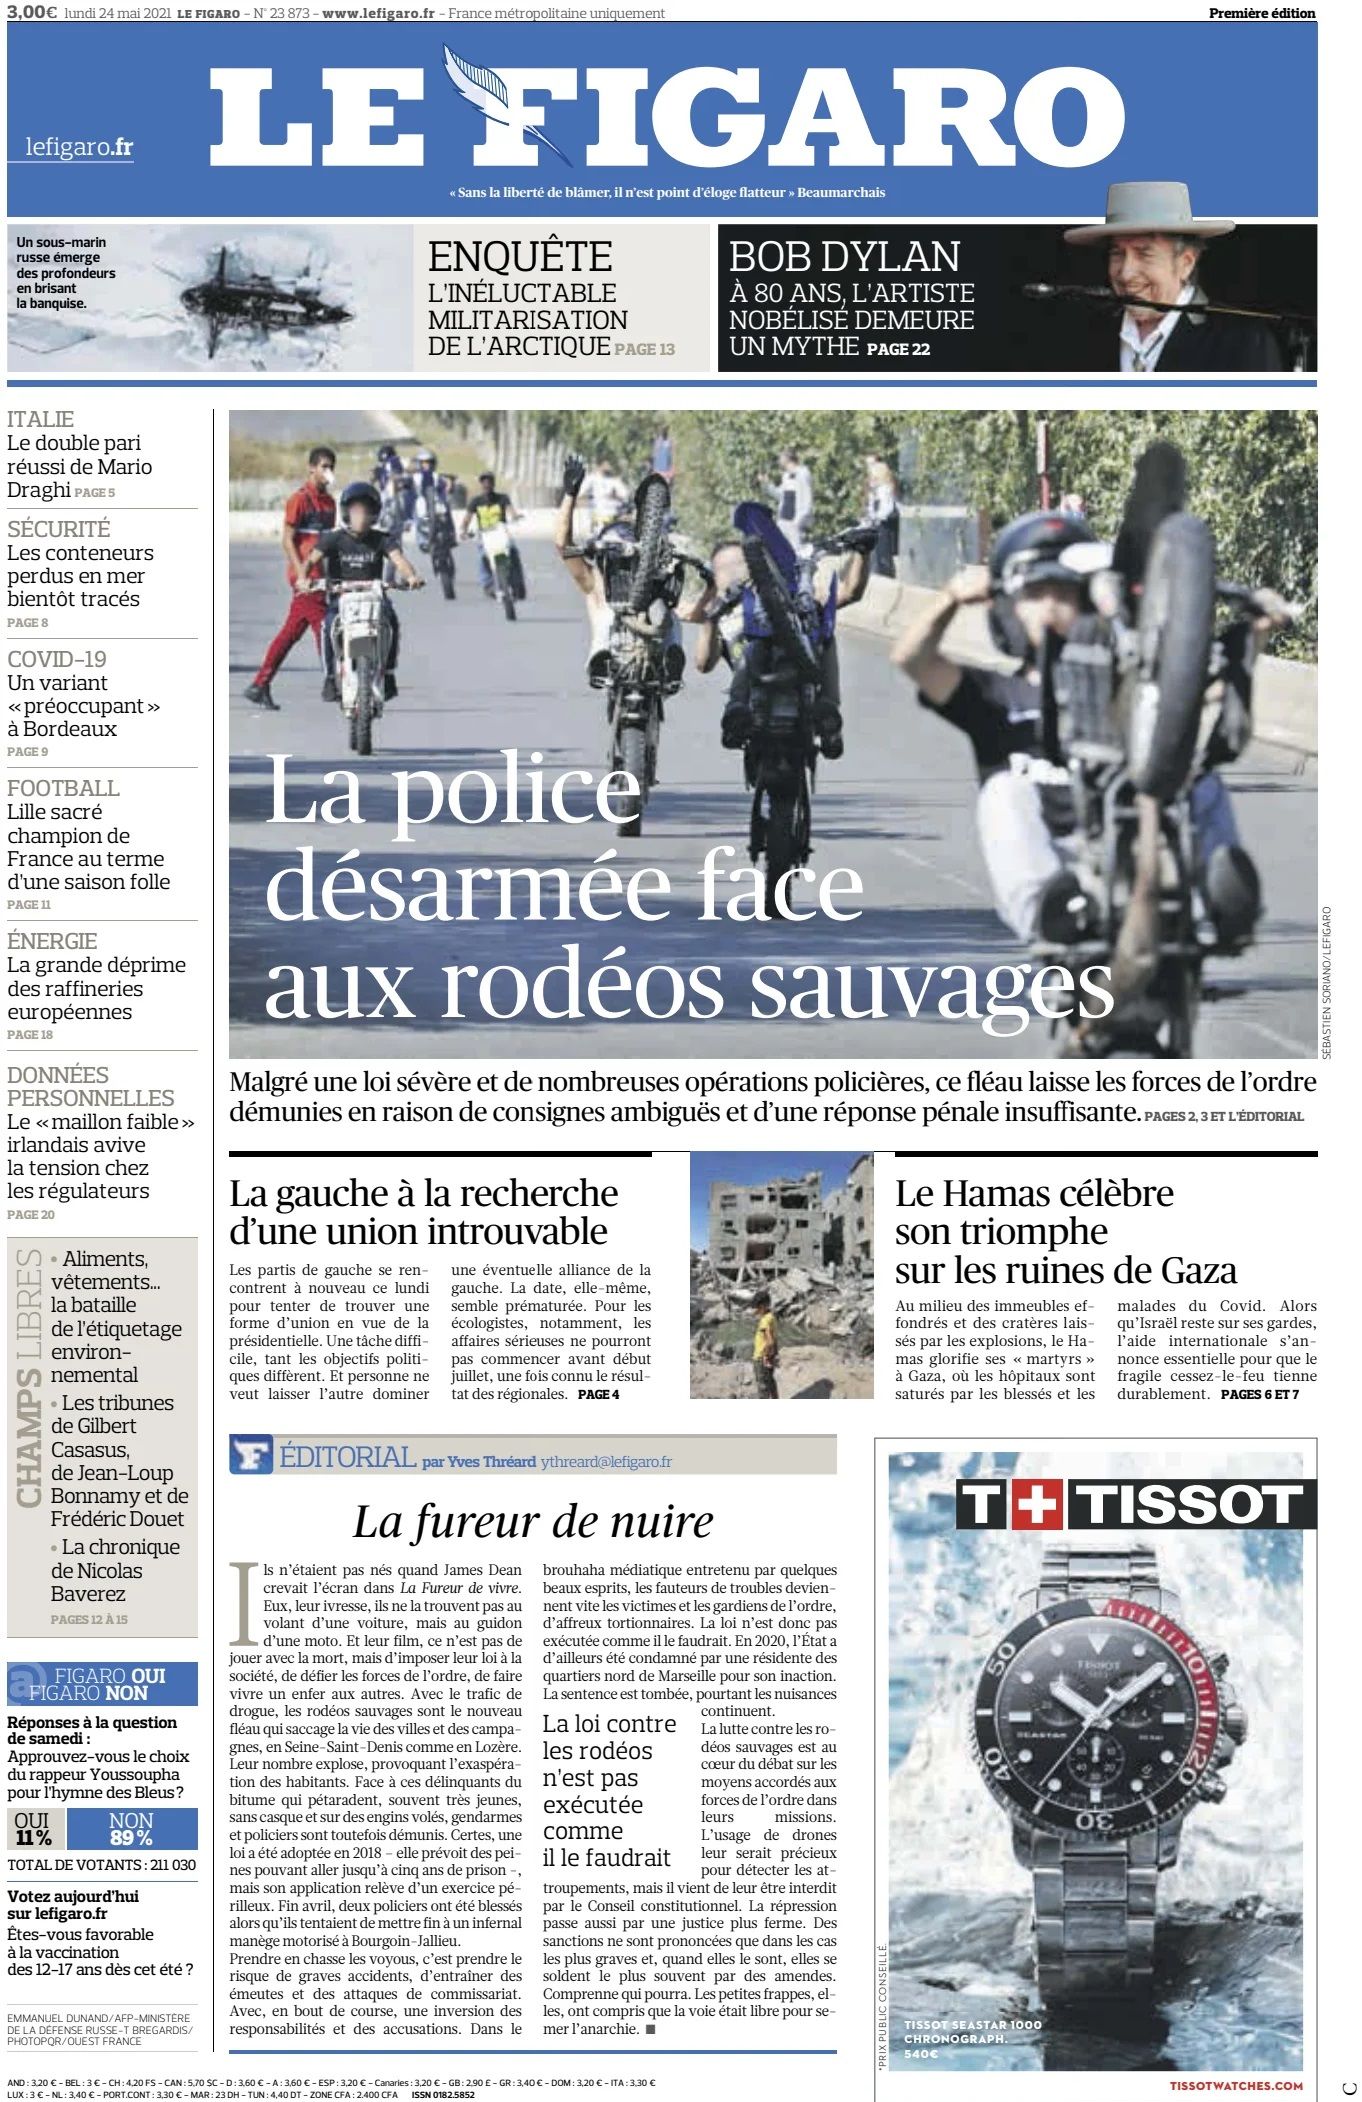 le figaro 24 05 2021 Bob Dylan cover story